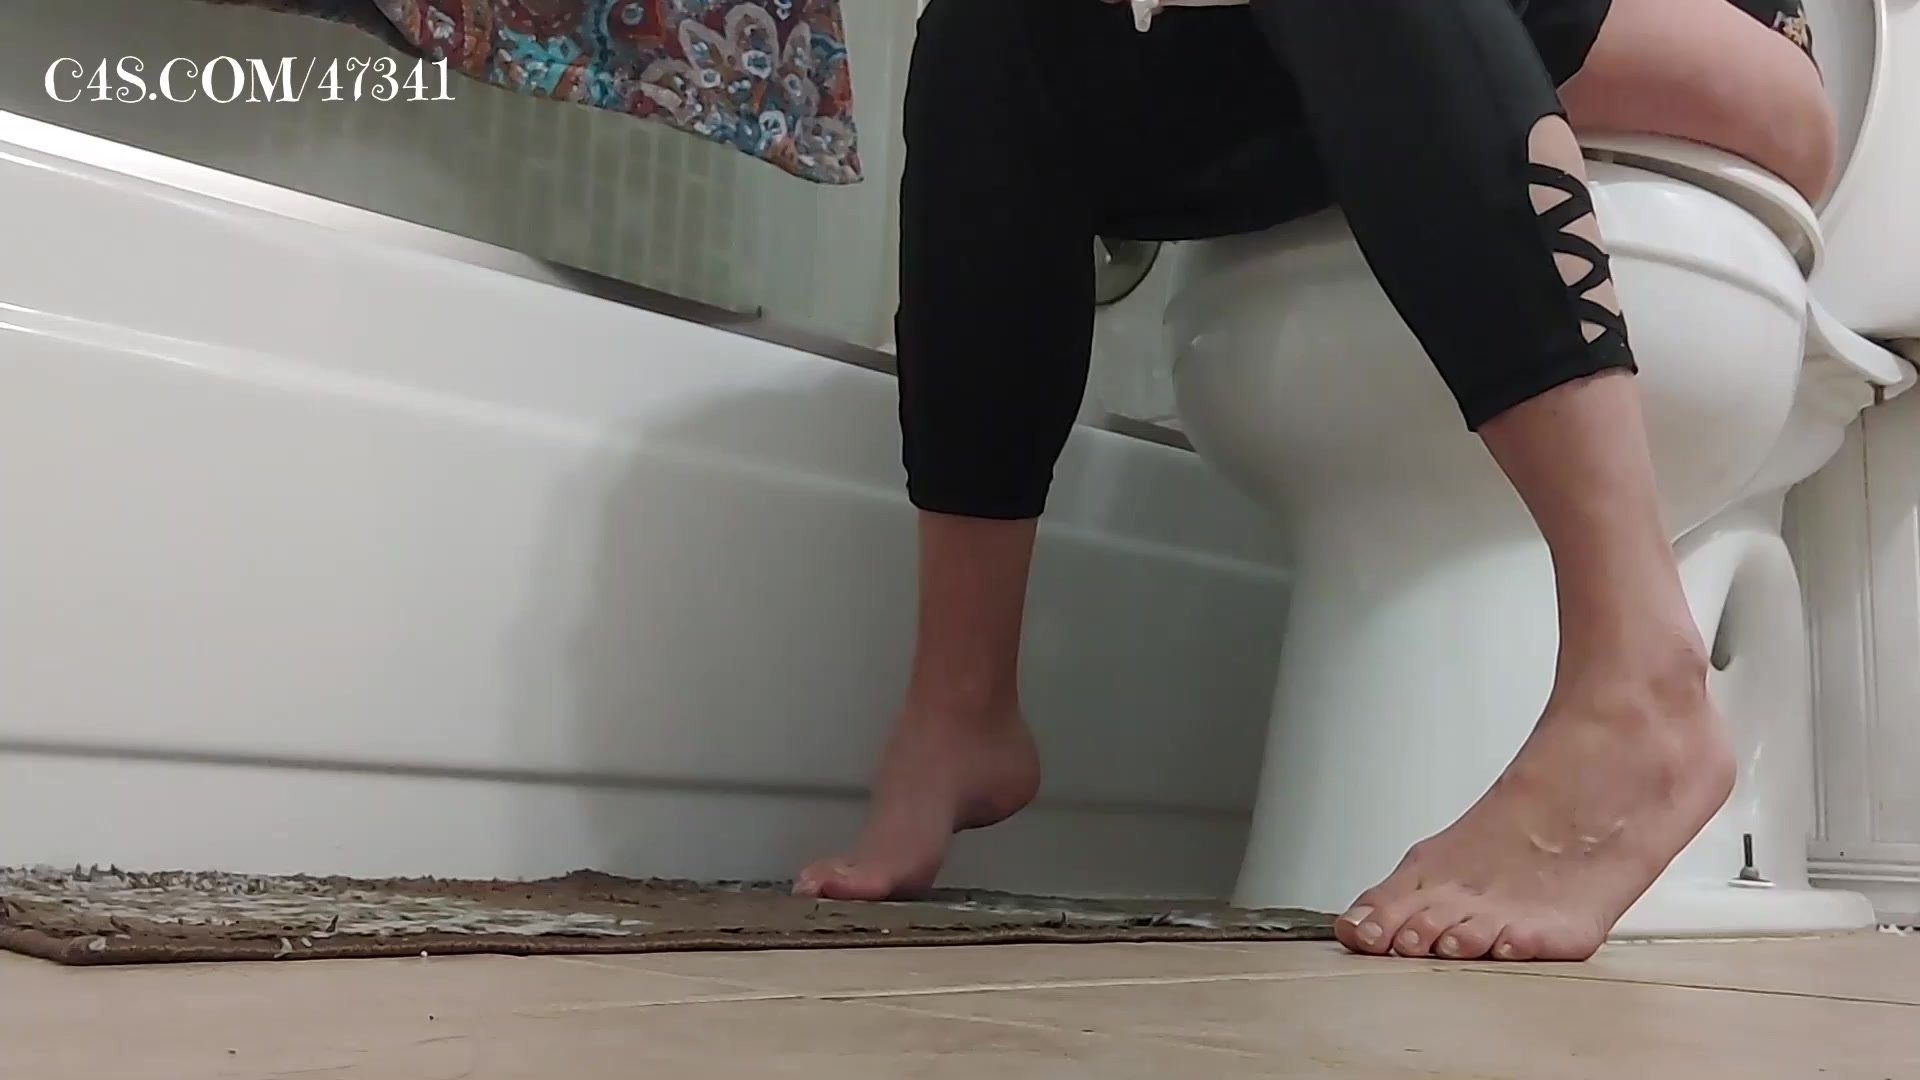 Destroying The Toilet 2 - video 2